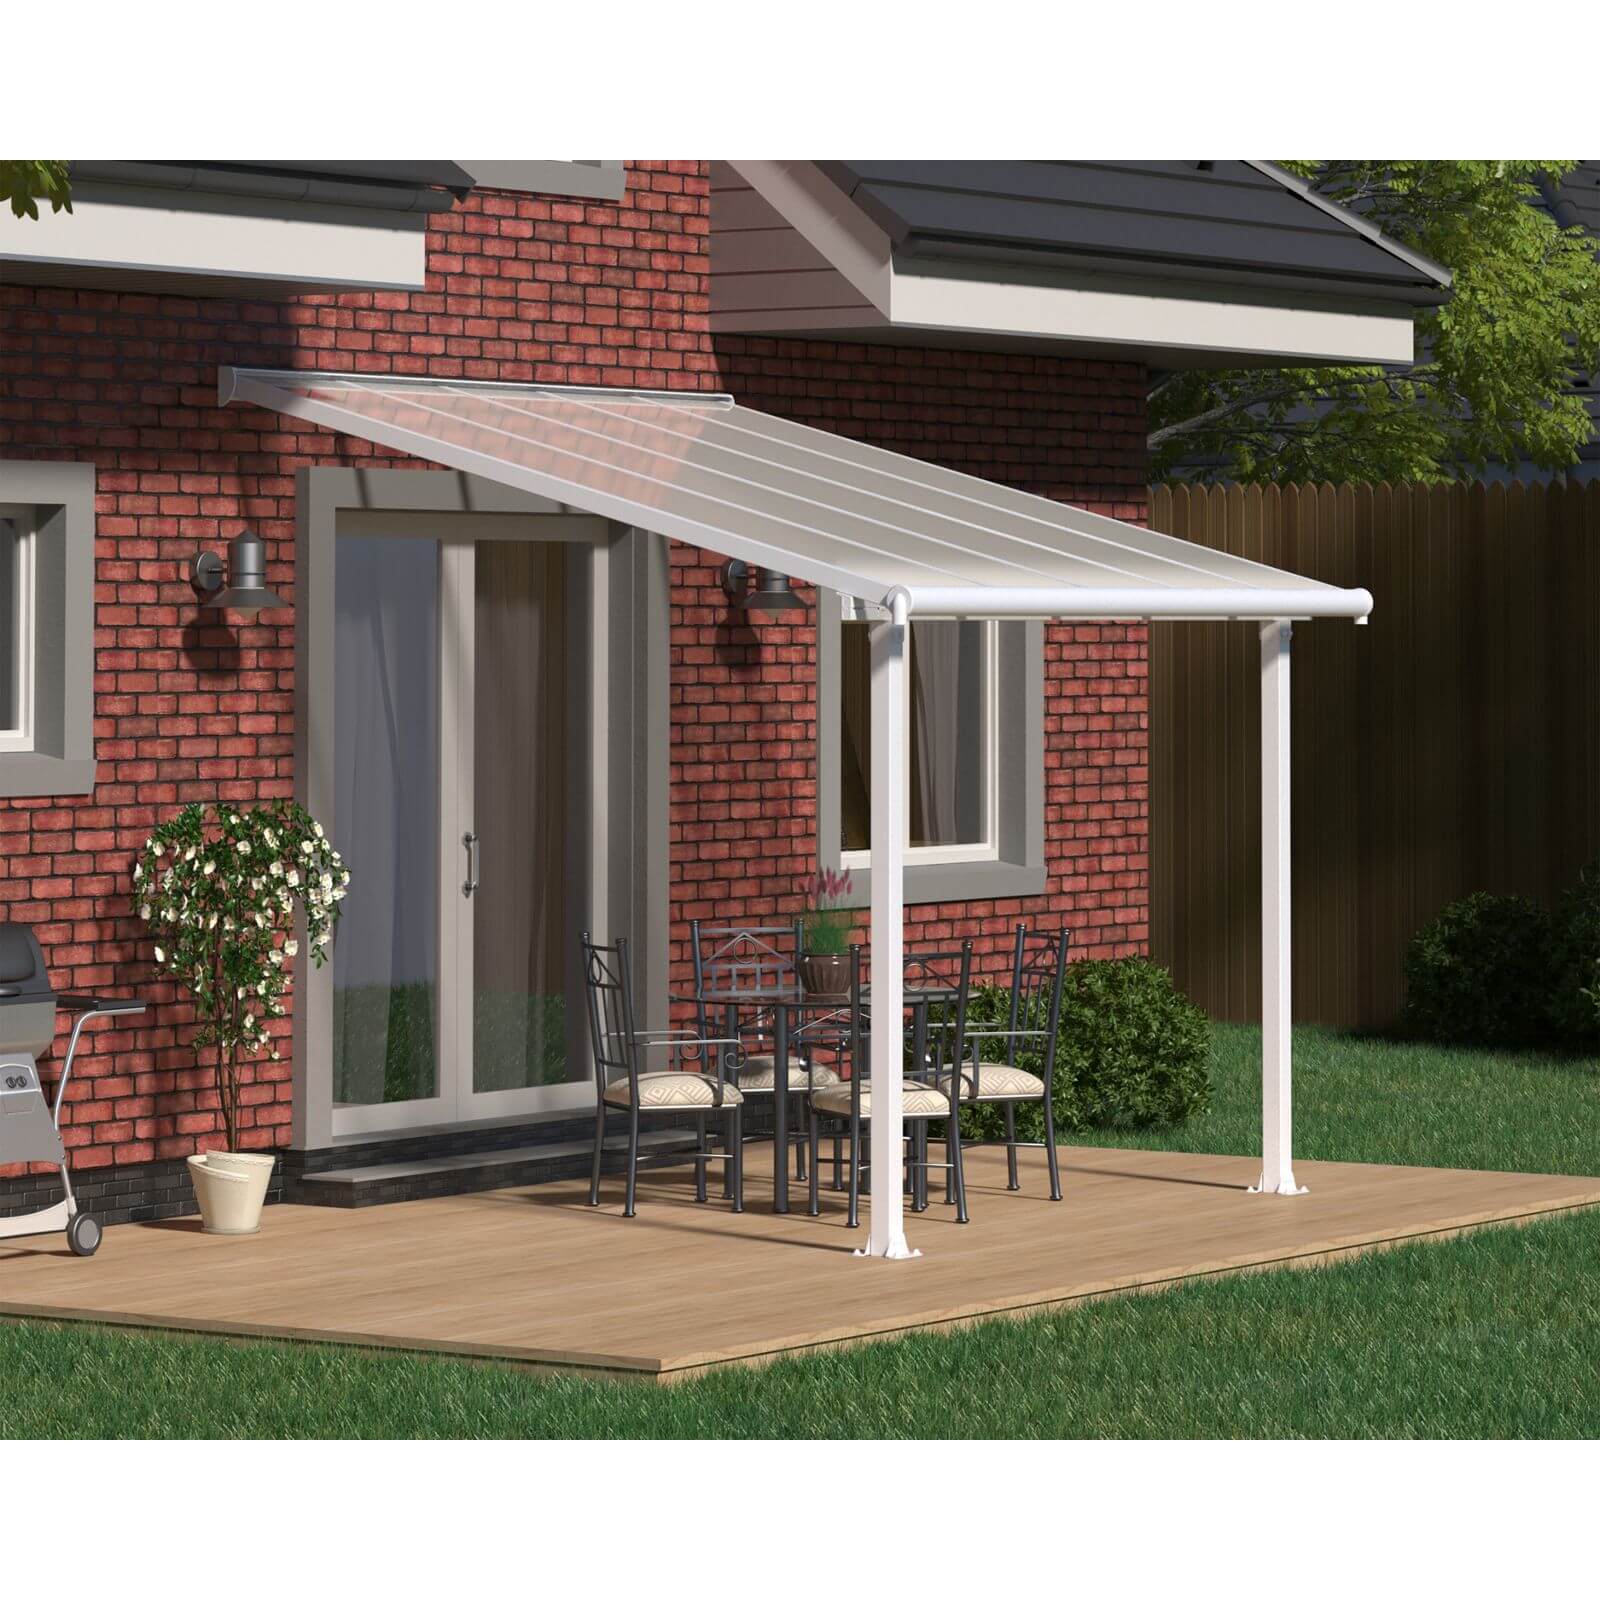 Palram - Canopia Olympia Patio Cover 3X3.05 White Clear